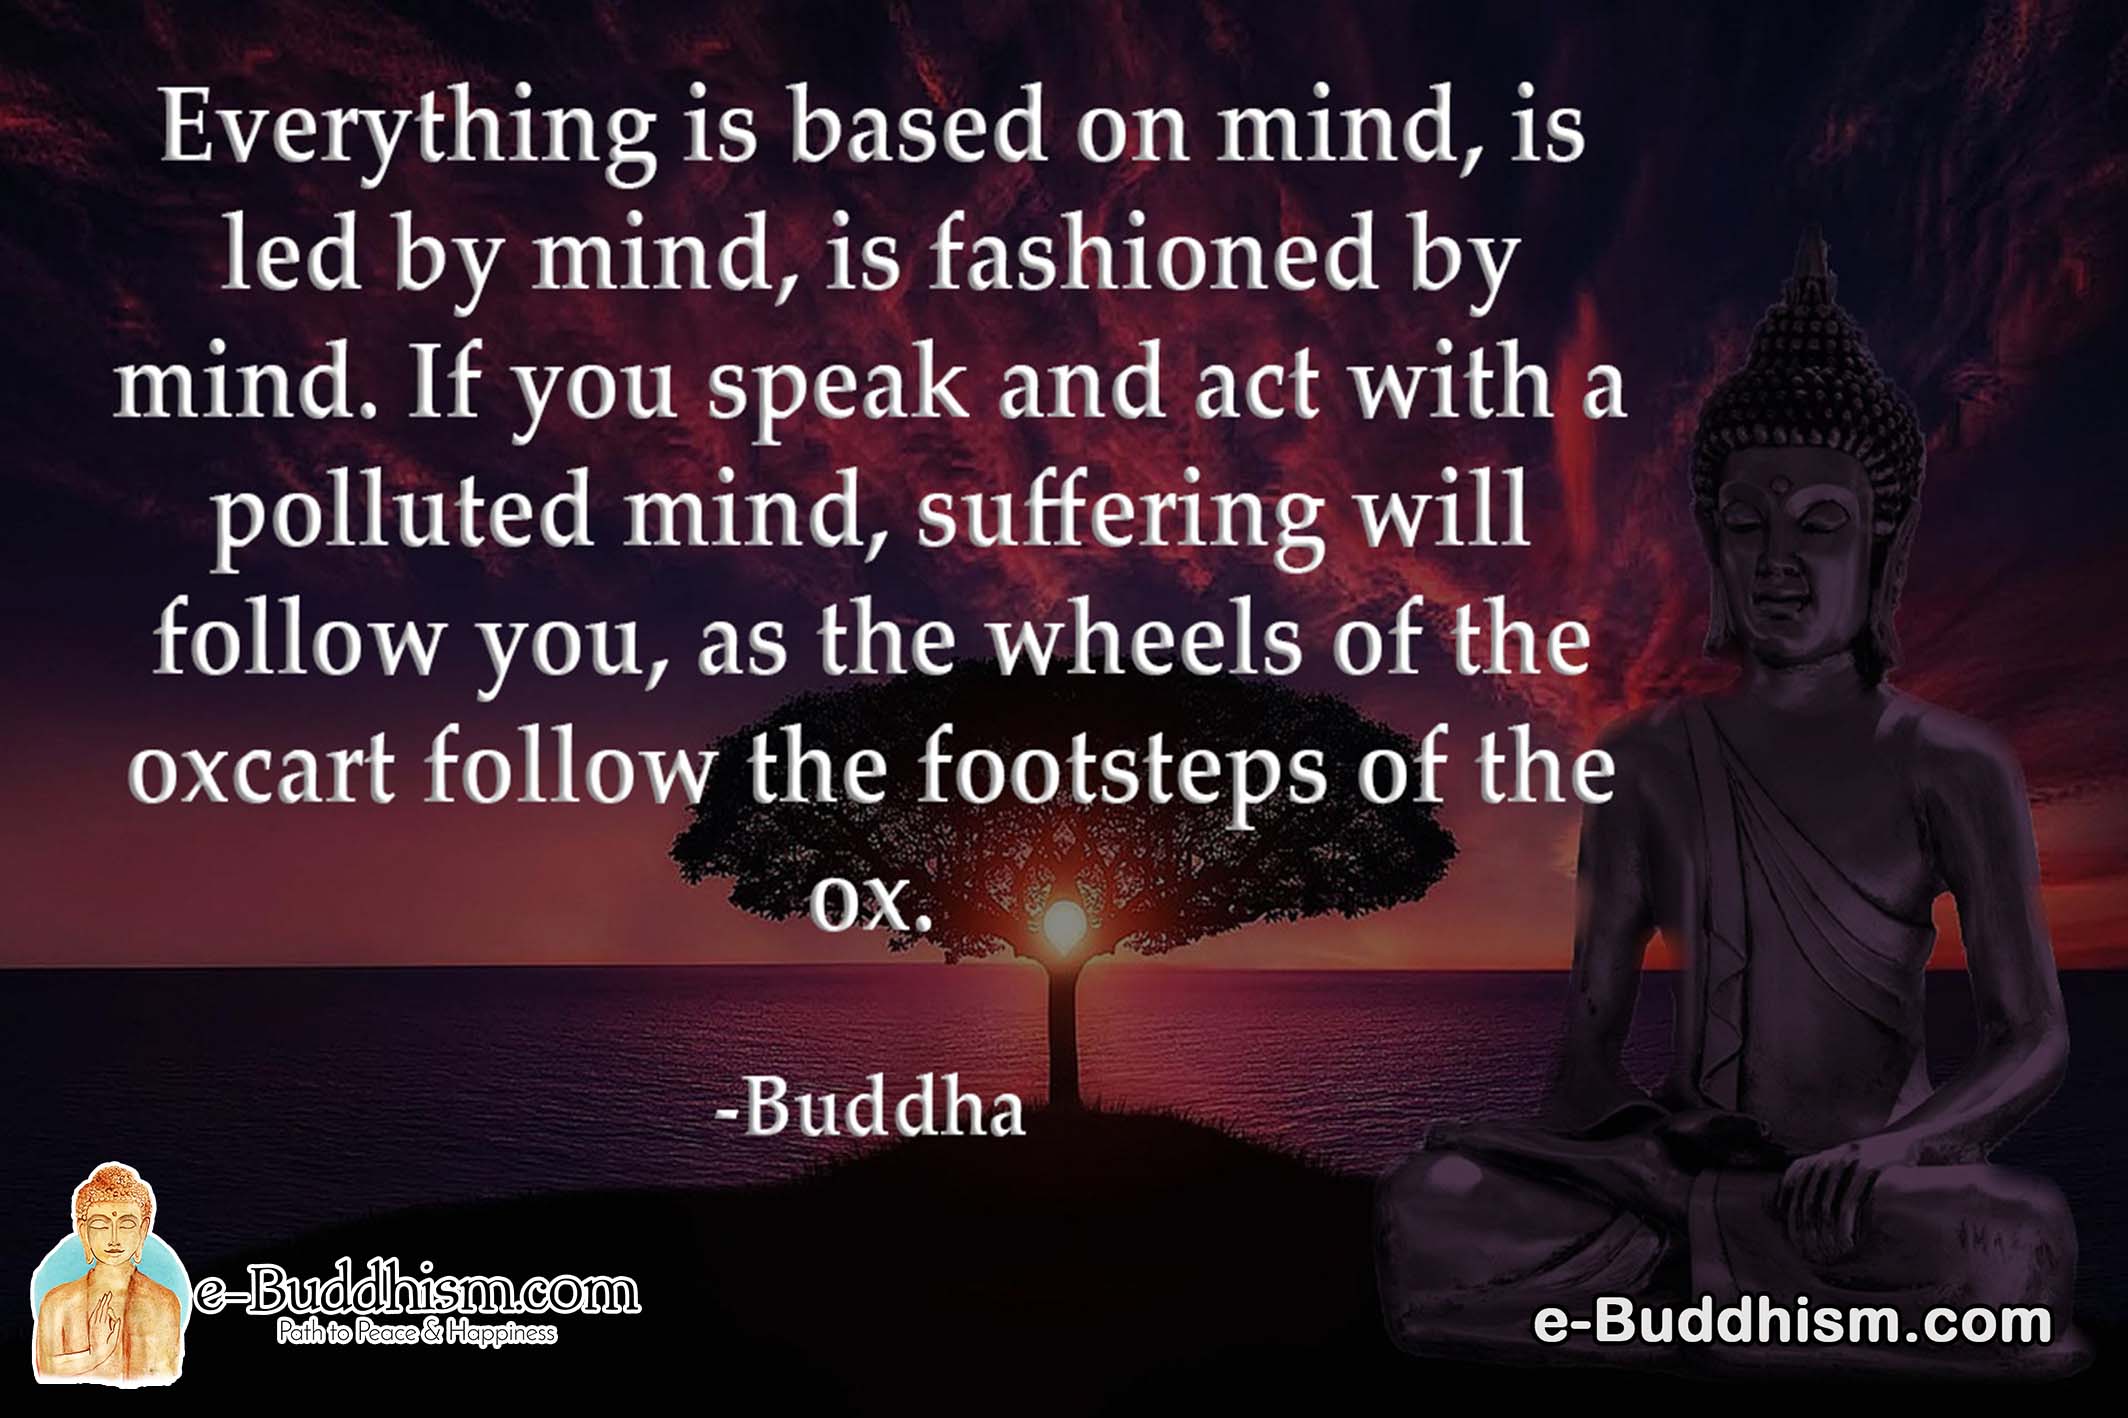 Everything is based on mind, is led by mind, is fashioned by mind. If you speak and act with polluted mind, suffering will follow you, as the wheels of the oxcart follow the footsteps of the ox. -Buddha